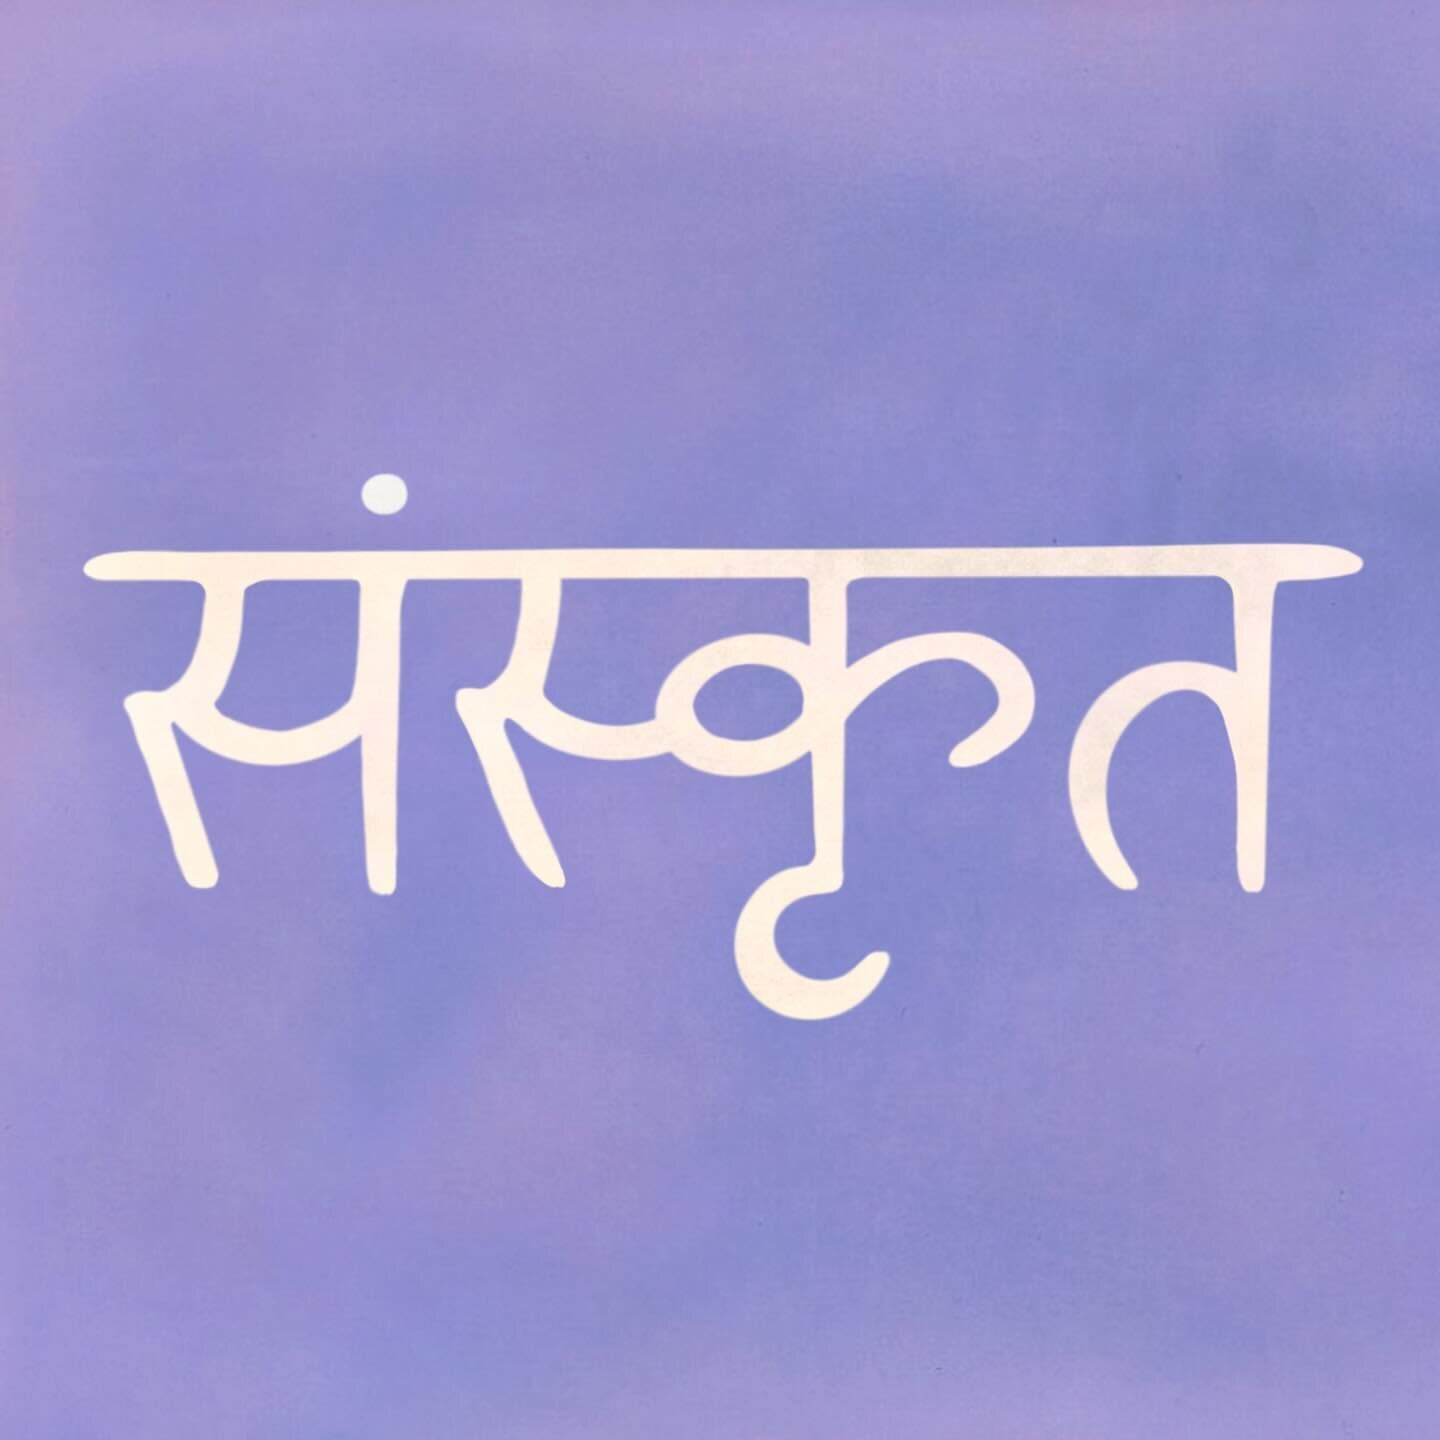 SAṂSKṚTA संस्कृत &mdash; Saṃskṛta is the word for Sanskrit, an Indo-European language with a history of use spanning centuries, which is understood to be &ldquo;perfectly constructed&rdquo; or &ldquo;well-formed&rdquo; according to the translation of